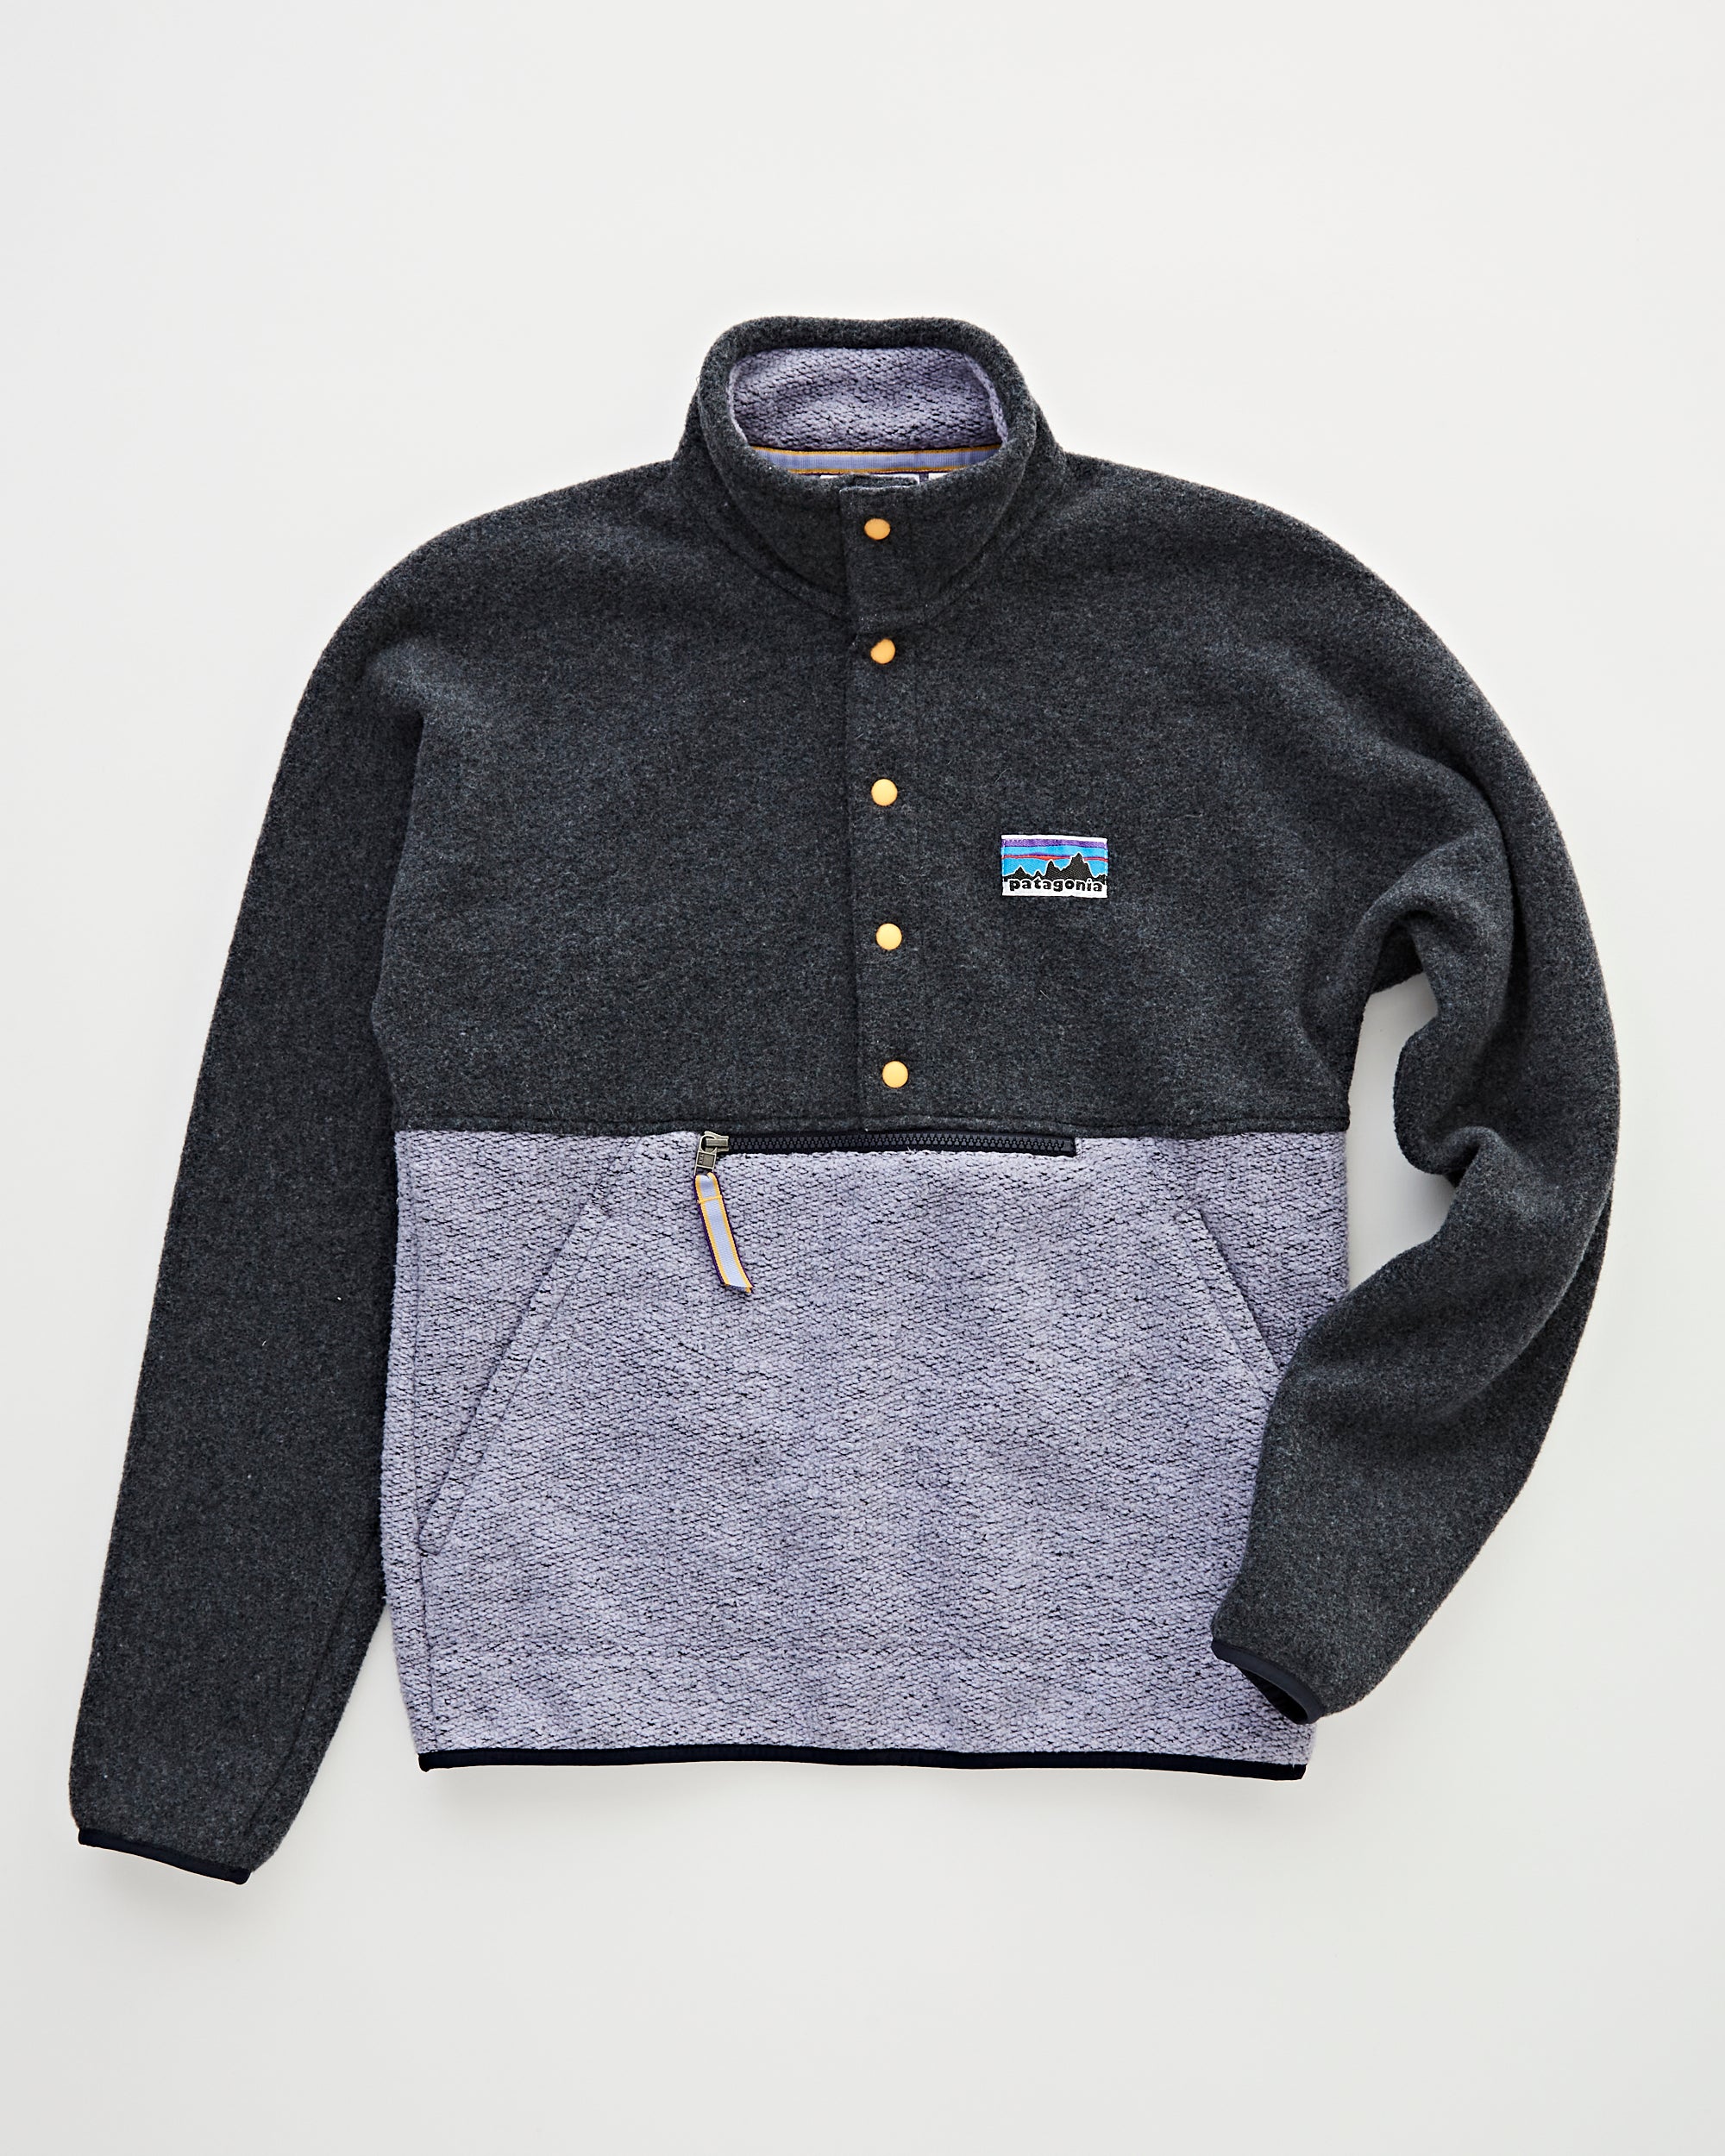 Patagonia – 50th Anniversary Natural Blend Snap-T Pale Periwinkle